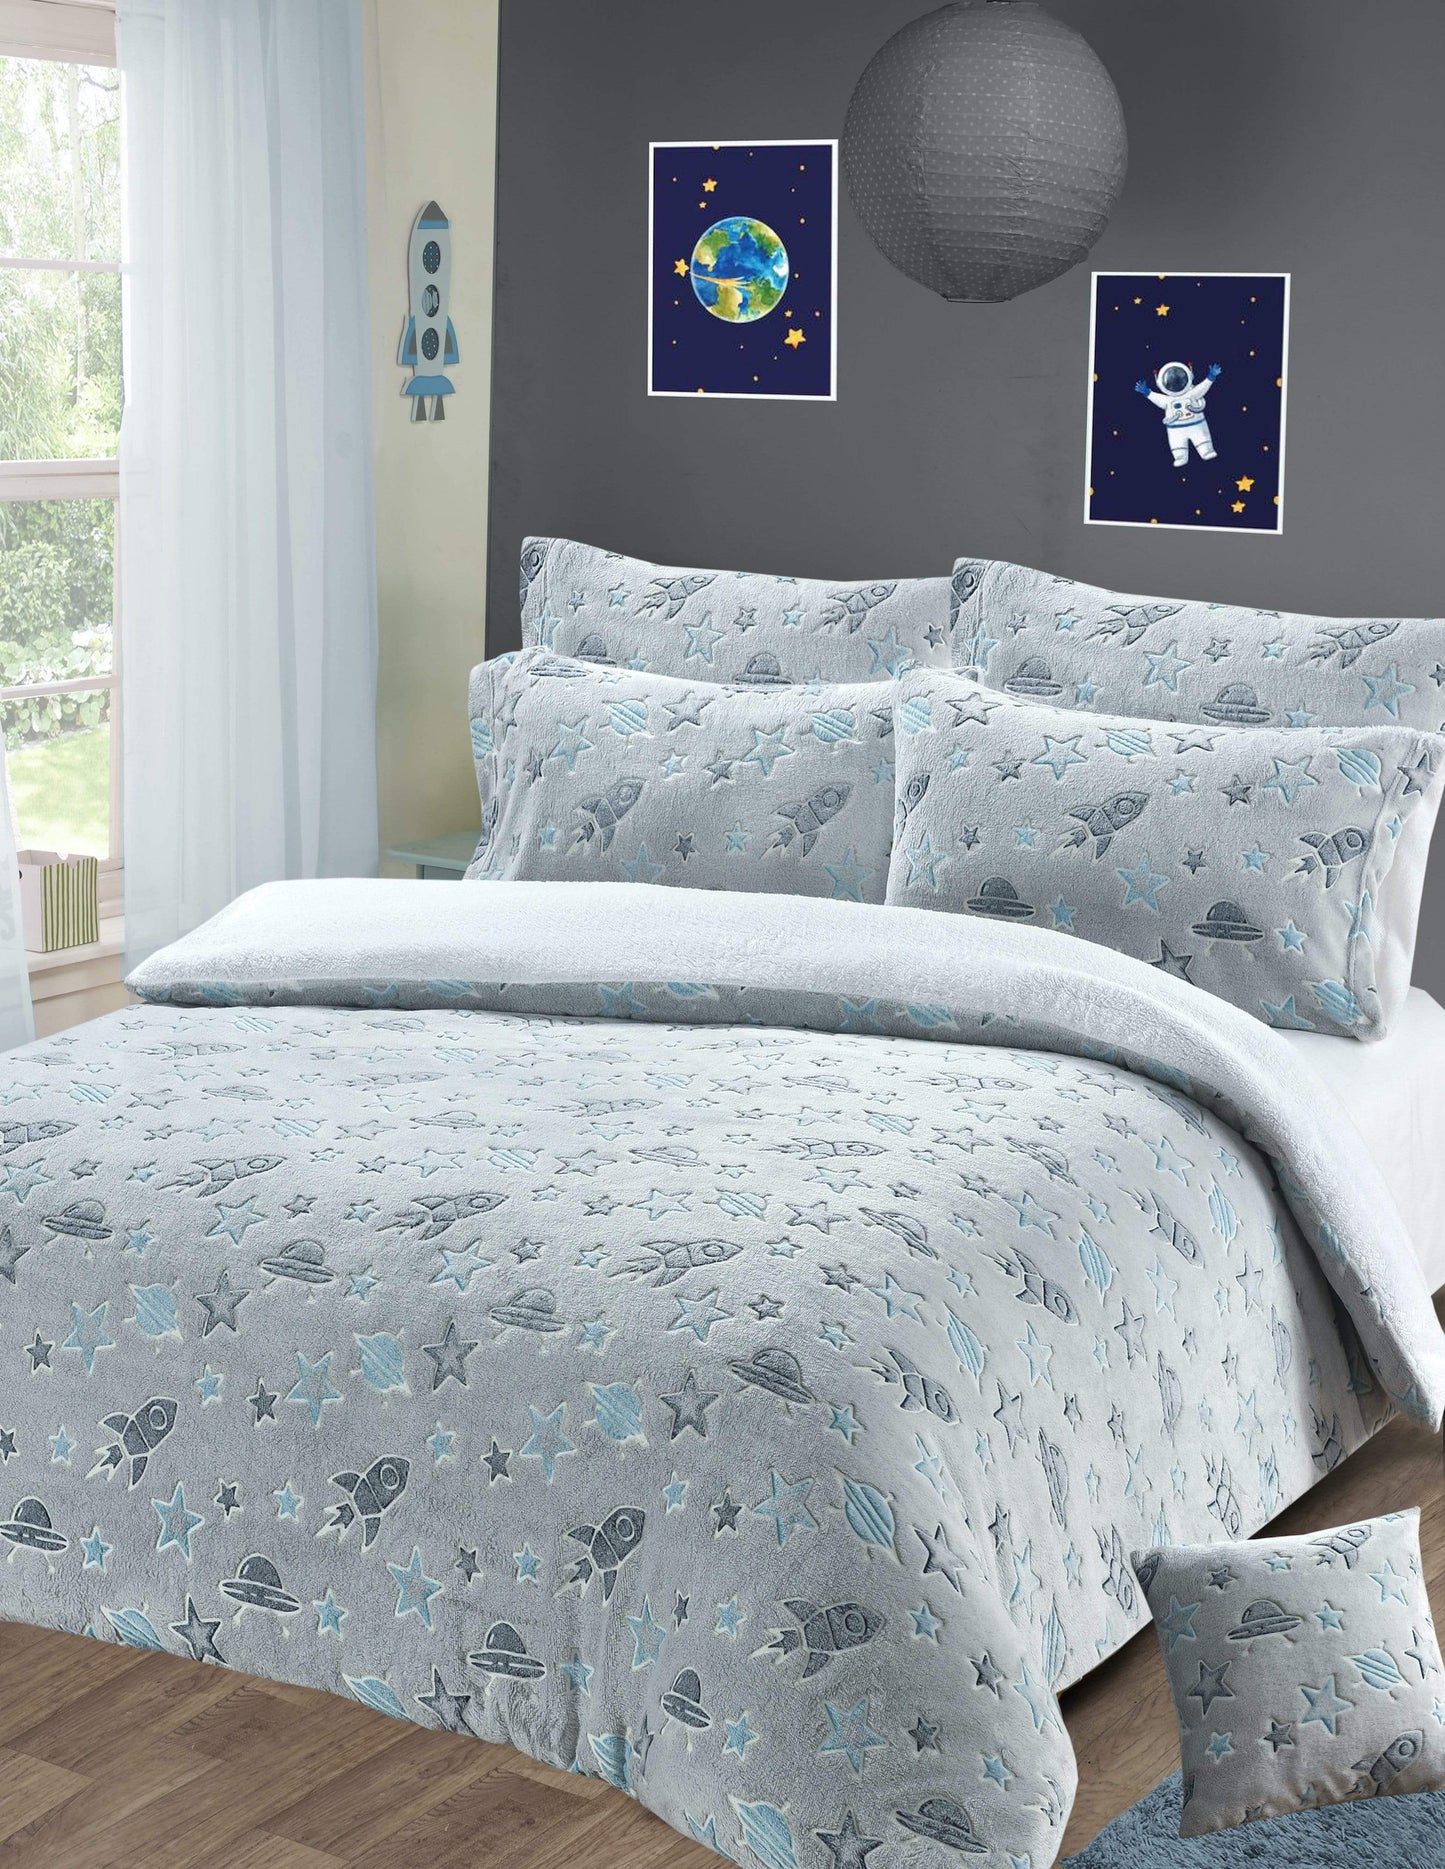 Outer Space Glow In The Dark Teddy Duvet Set SINGLE OLIVIA ROCCO Duvet Cover